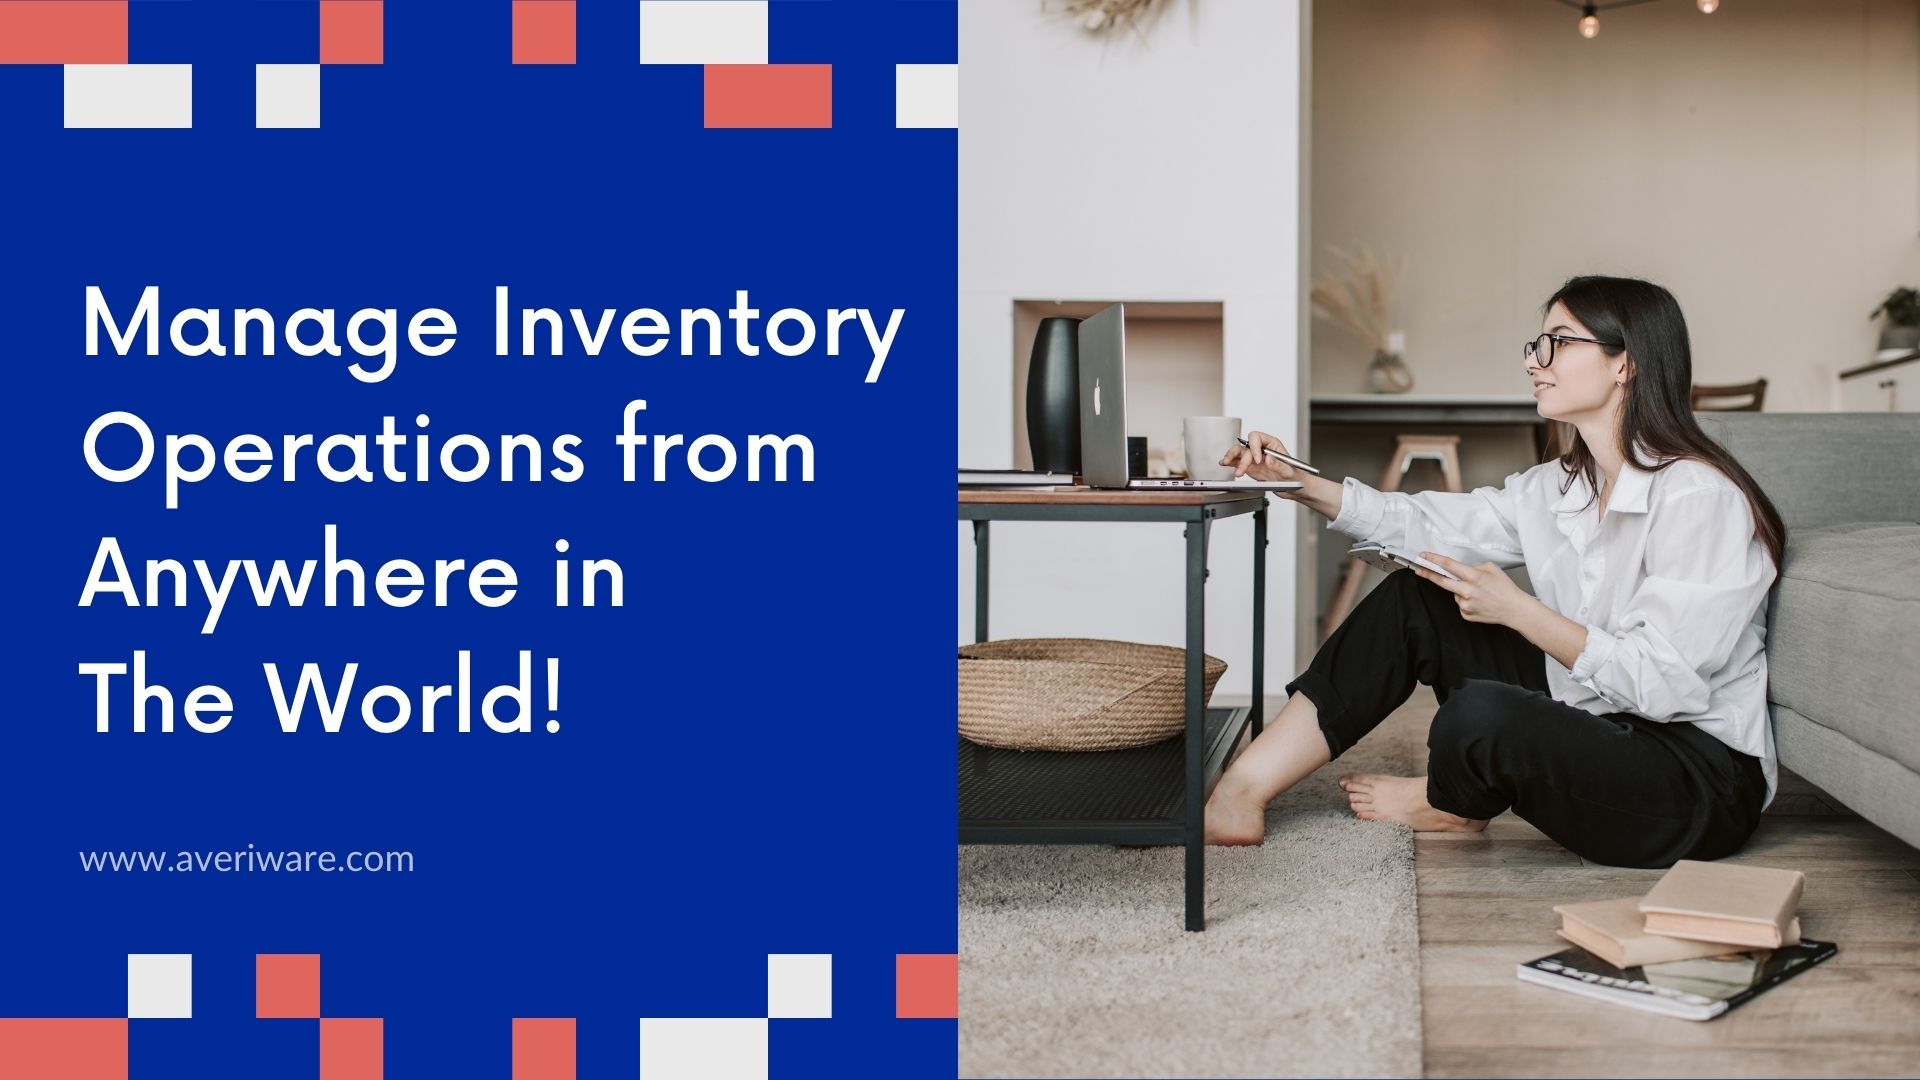 Manage Inventory Operations from Anywhere in The World